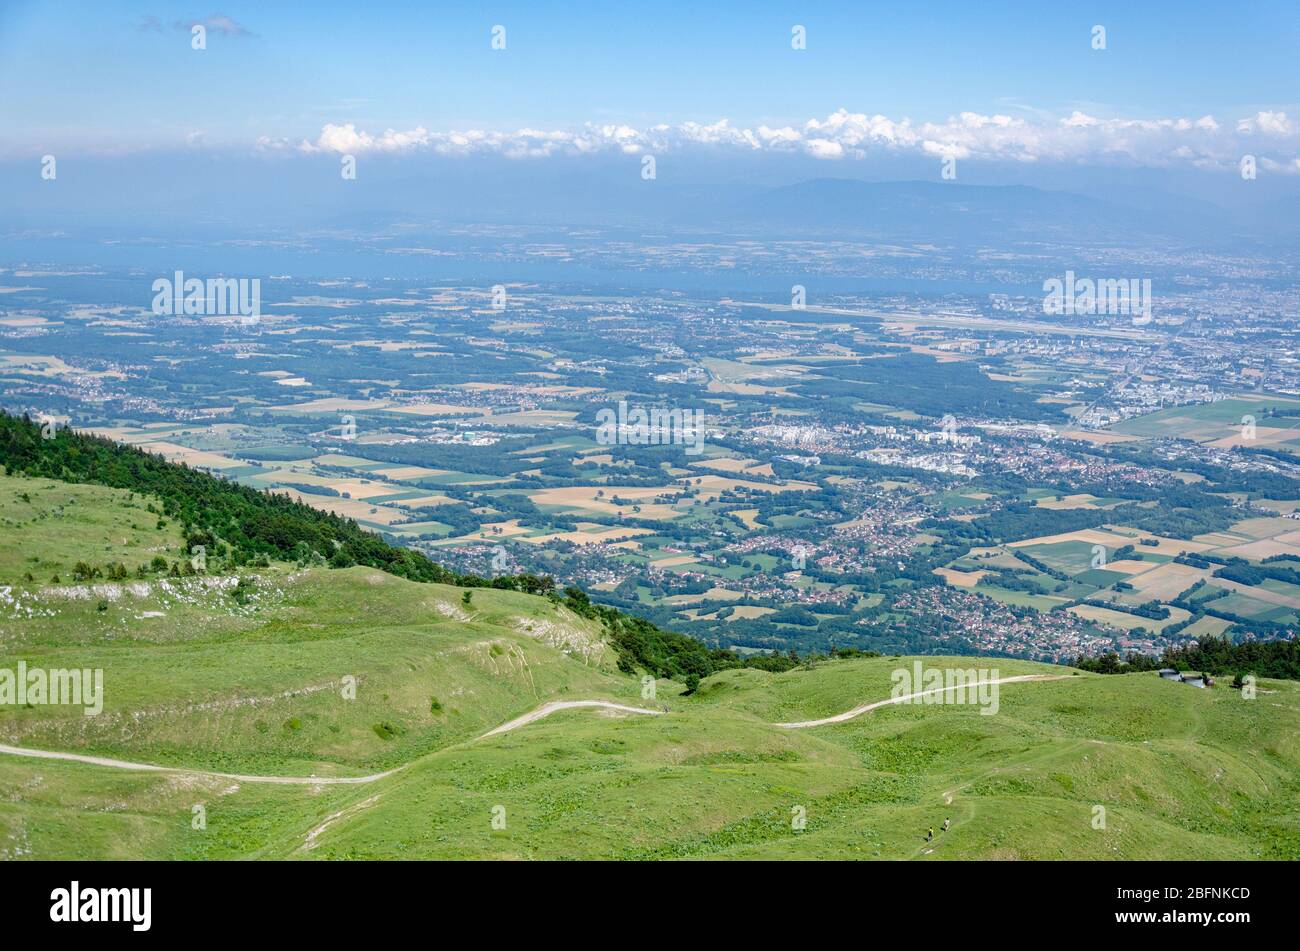 View of the Thoiry region in France and Geneva in Switzerland during summer season from the peak of Le Reculet in Jura Mountains, France Stock Photo